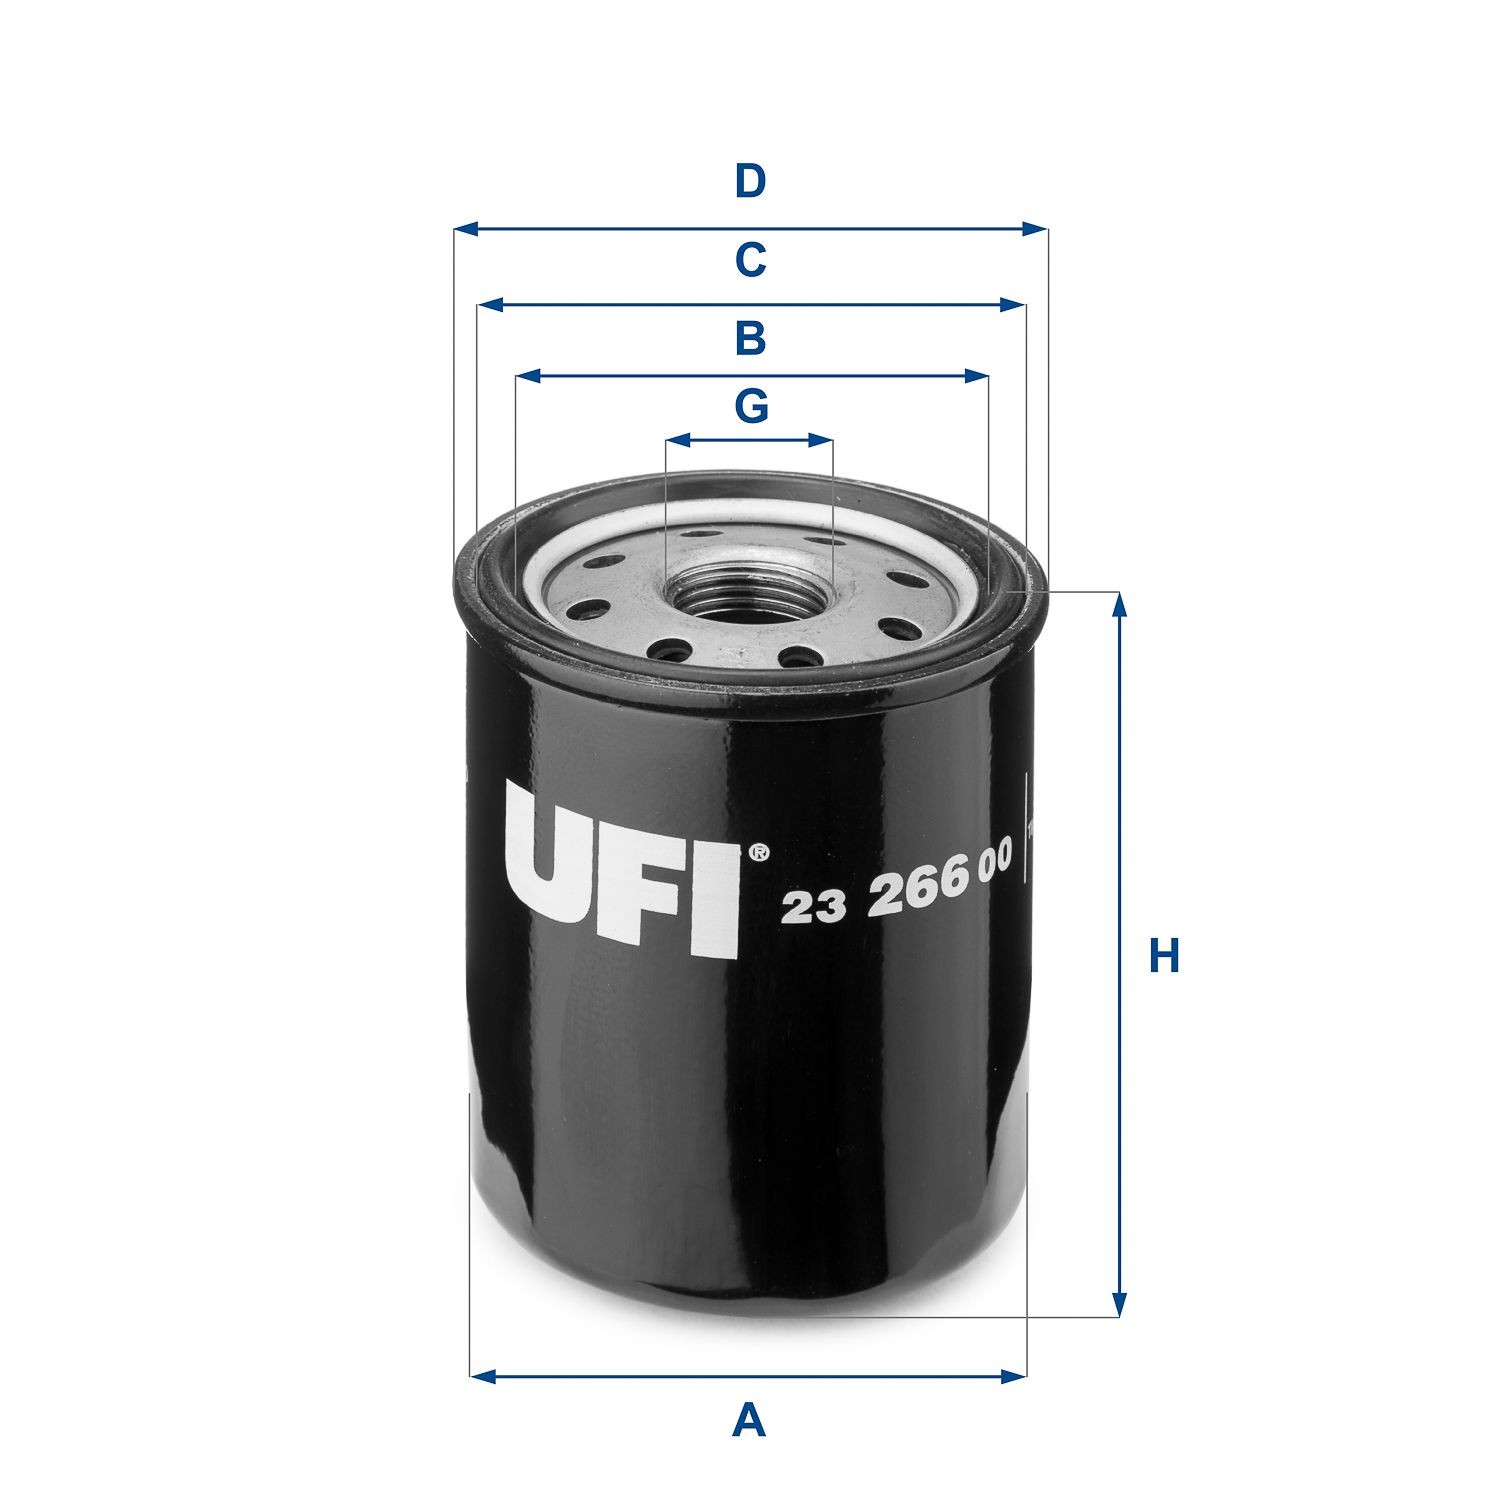 23.266.00 Oil filter 23.266.00 UFI 3/4-16 UNF, with one anti-return valve, Spin-on Filter